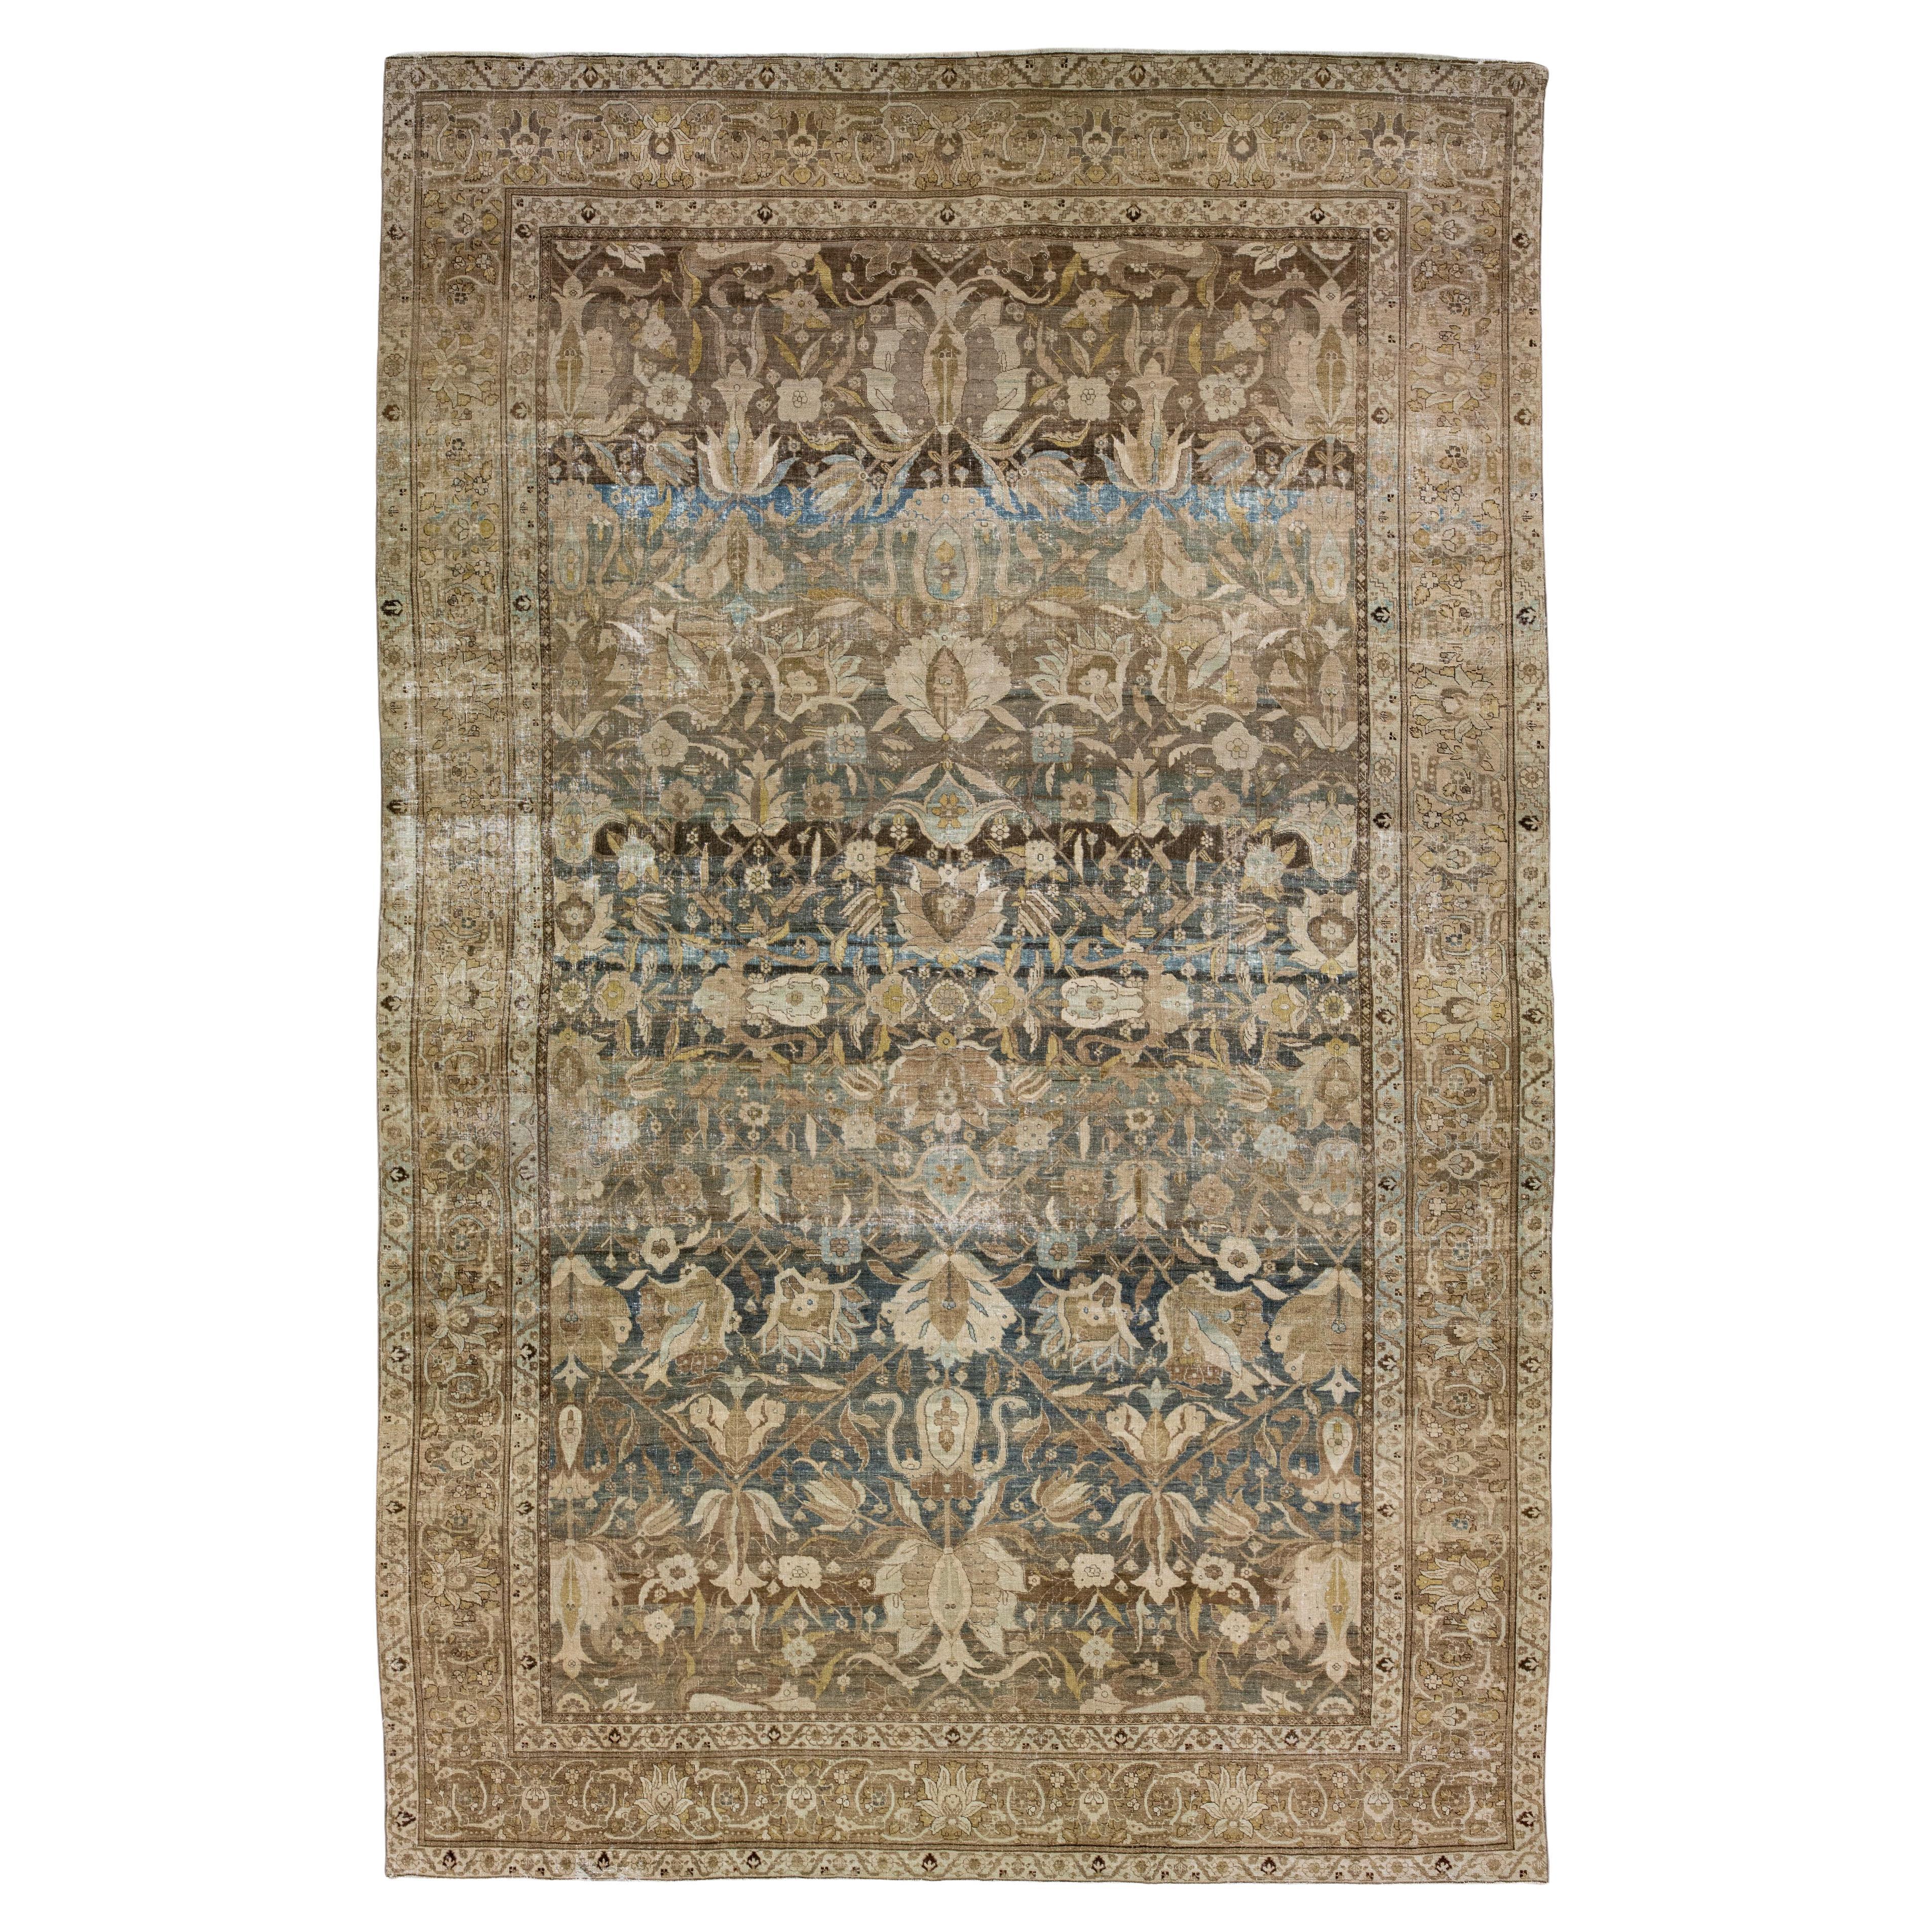 Oversize Antique Persian Heriz Handmade Floral Blue and Brown Wool Rug For Sale